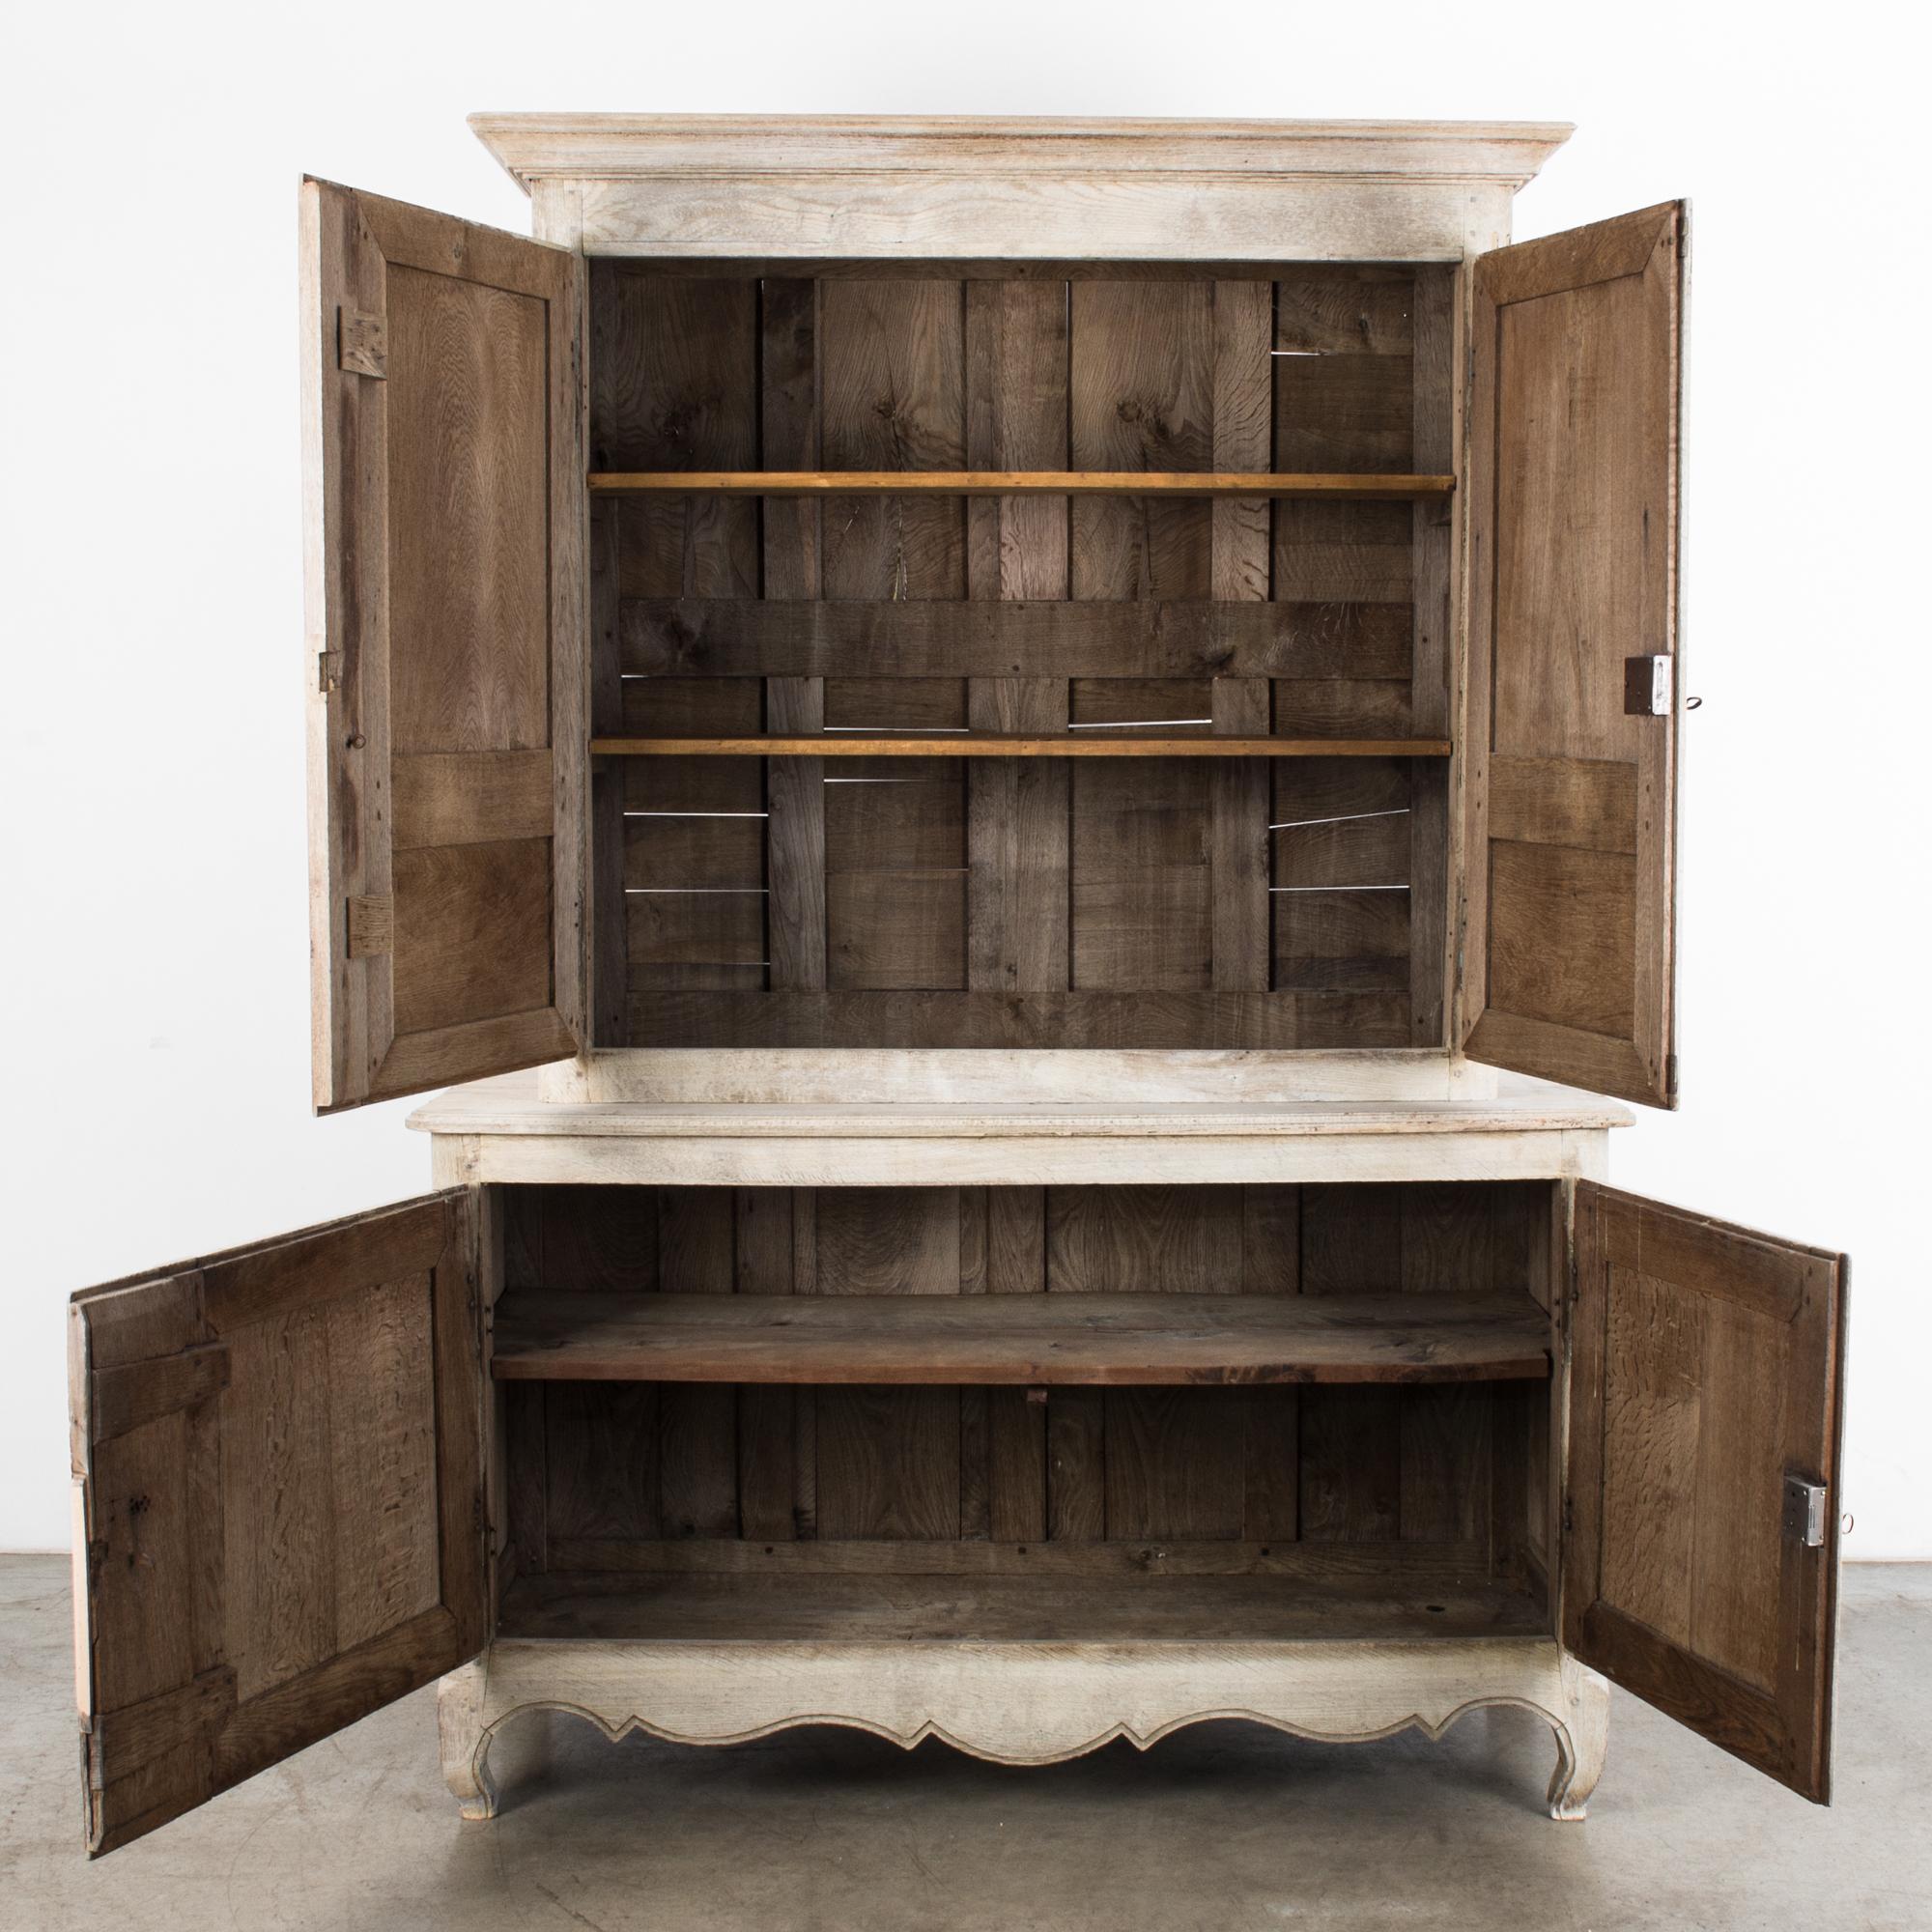 1880s French Country Natural Oak Armoire 1